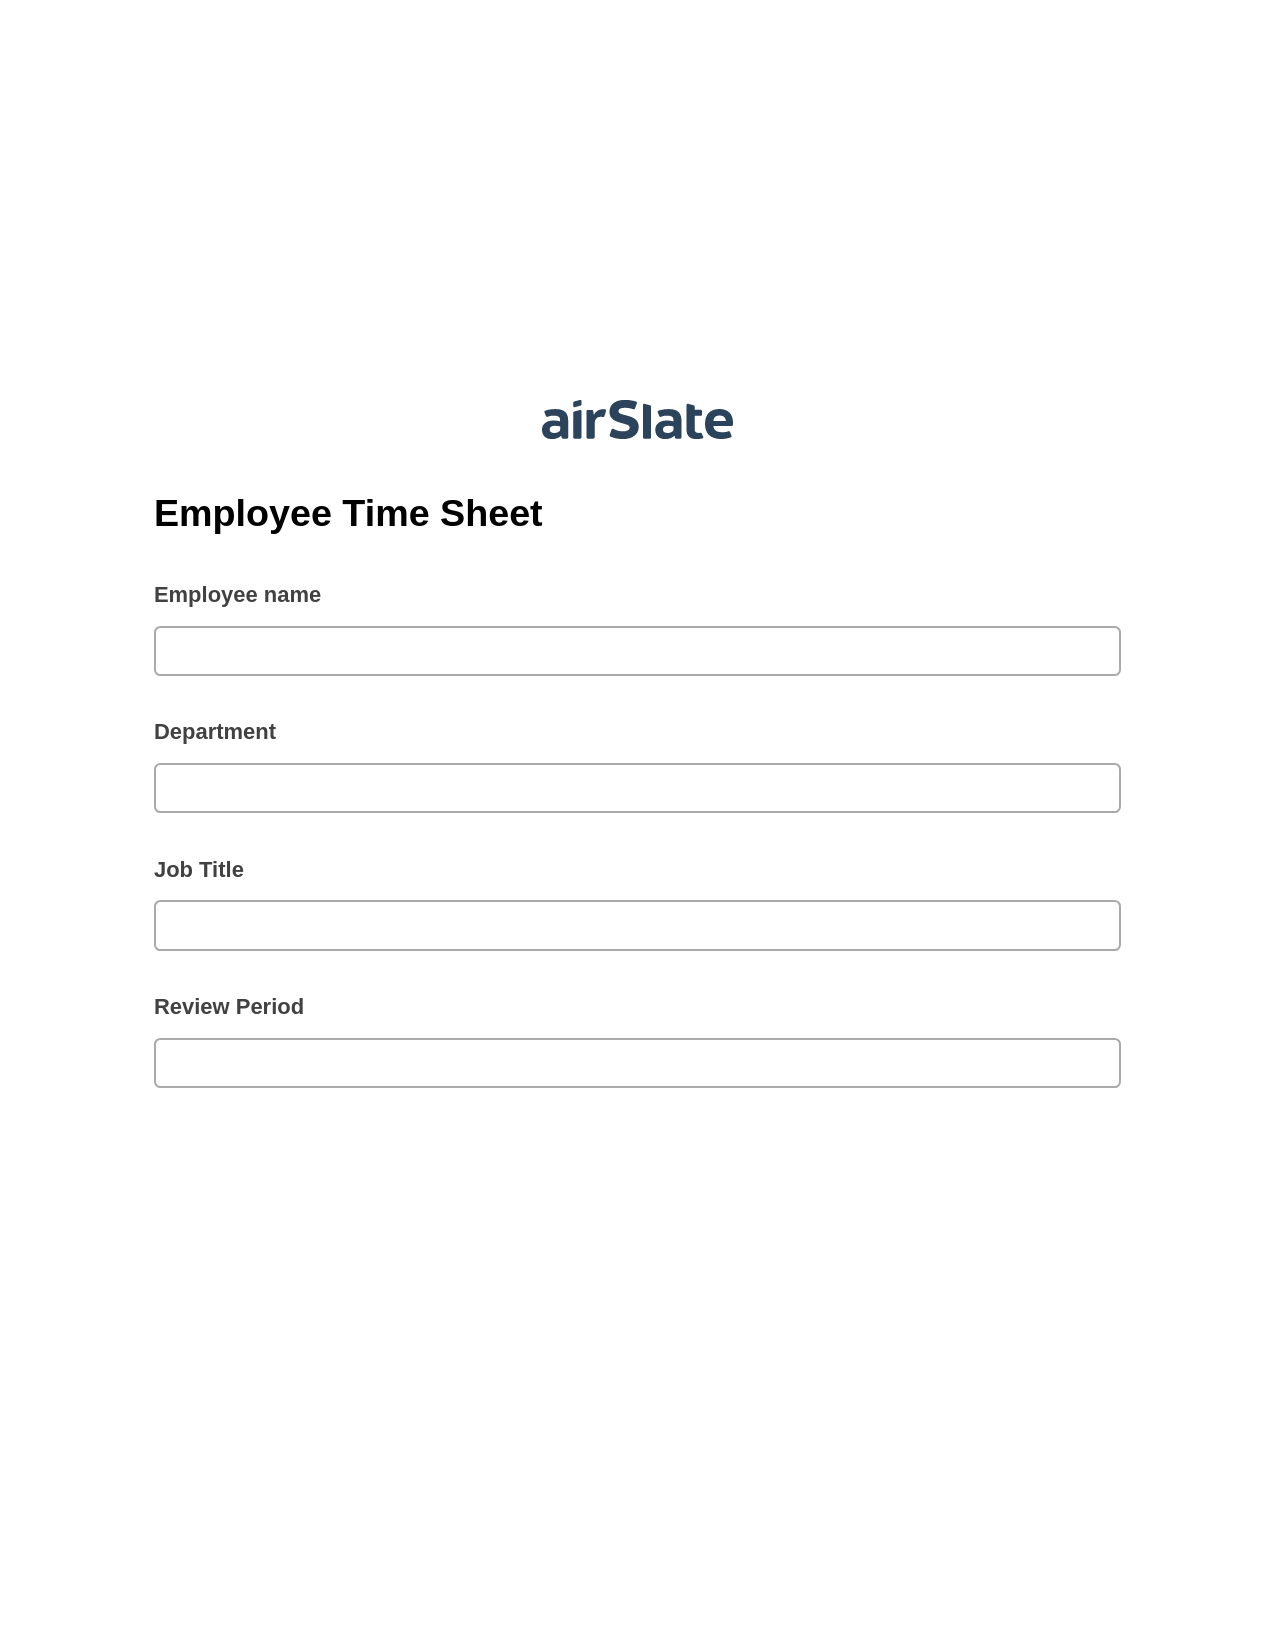 Multirole Employee Time Sheet Pre-fill from Office 365 Excel Bot, Create Salesforce Records Bot, Export to Smartsheet